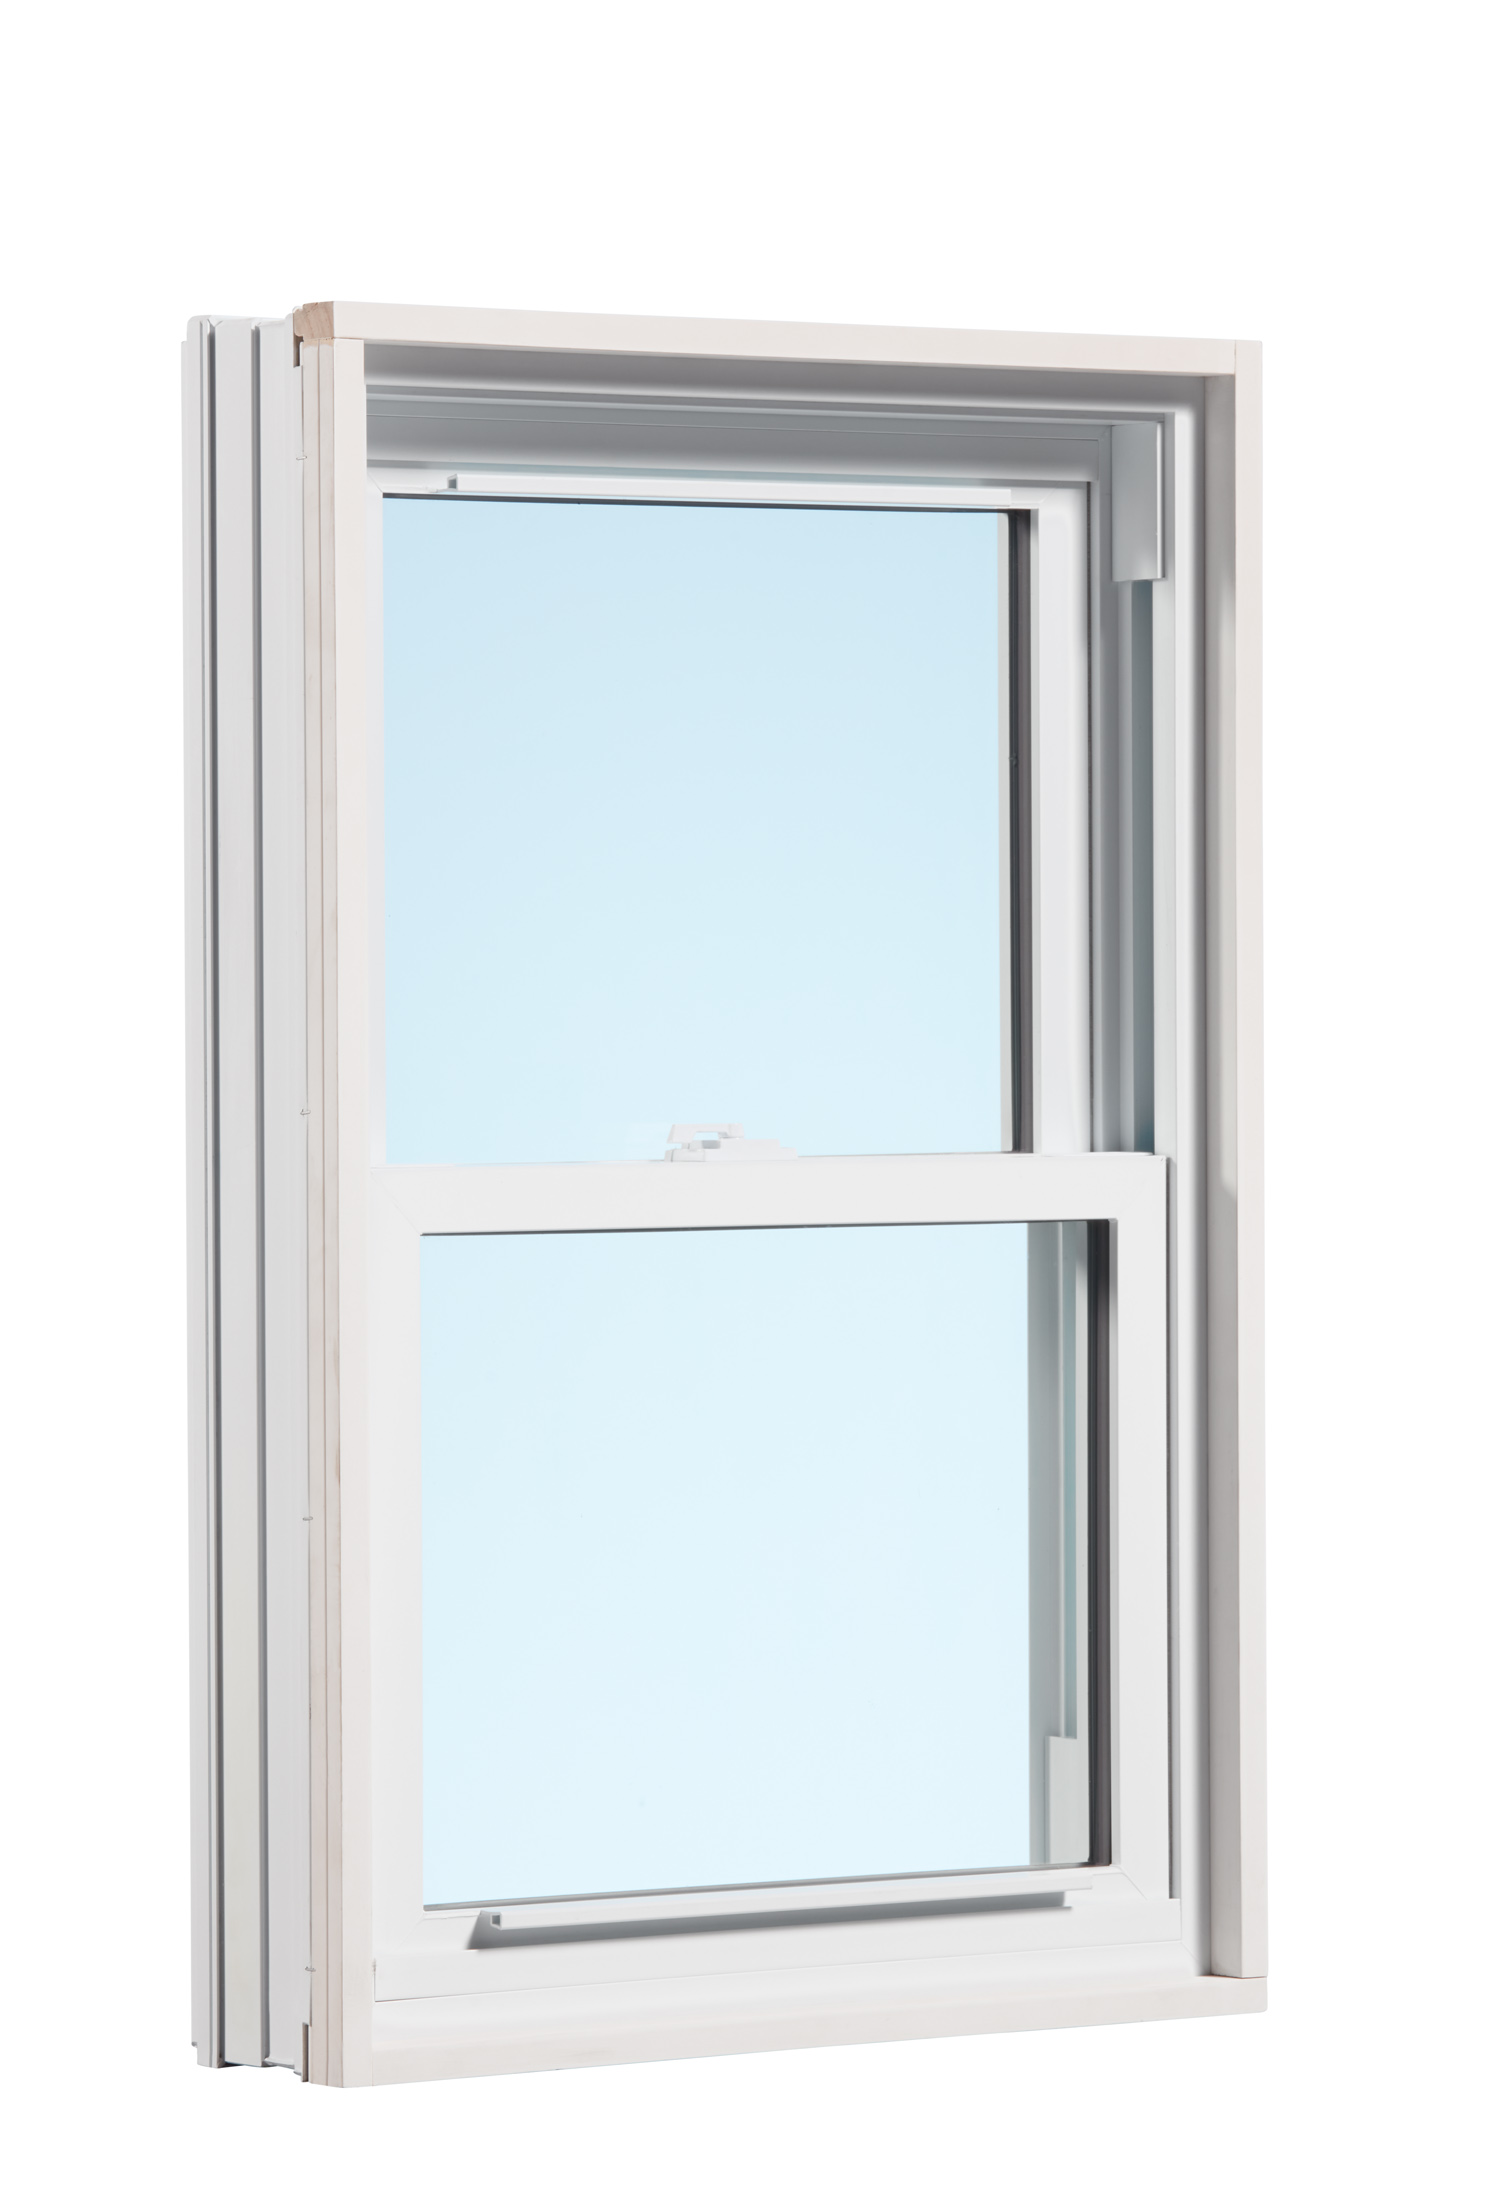 goldenvinyl®-1000-series-double-hung-window-img-7